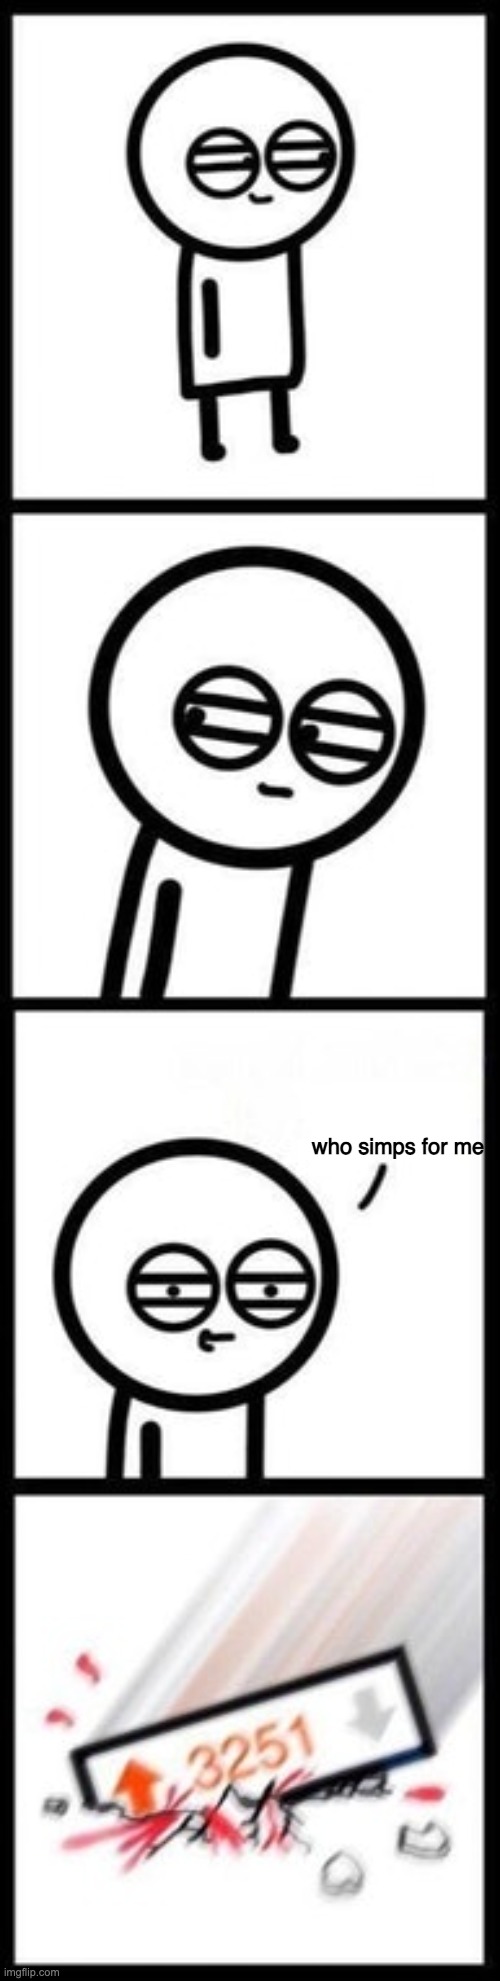 3251 upvotes | who simps for me | image tagged in 3251 upvotes | made w/ Imgflip meme maker